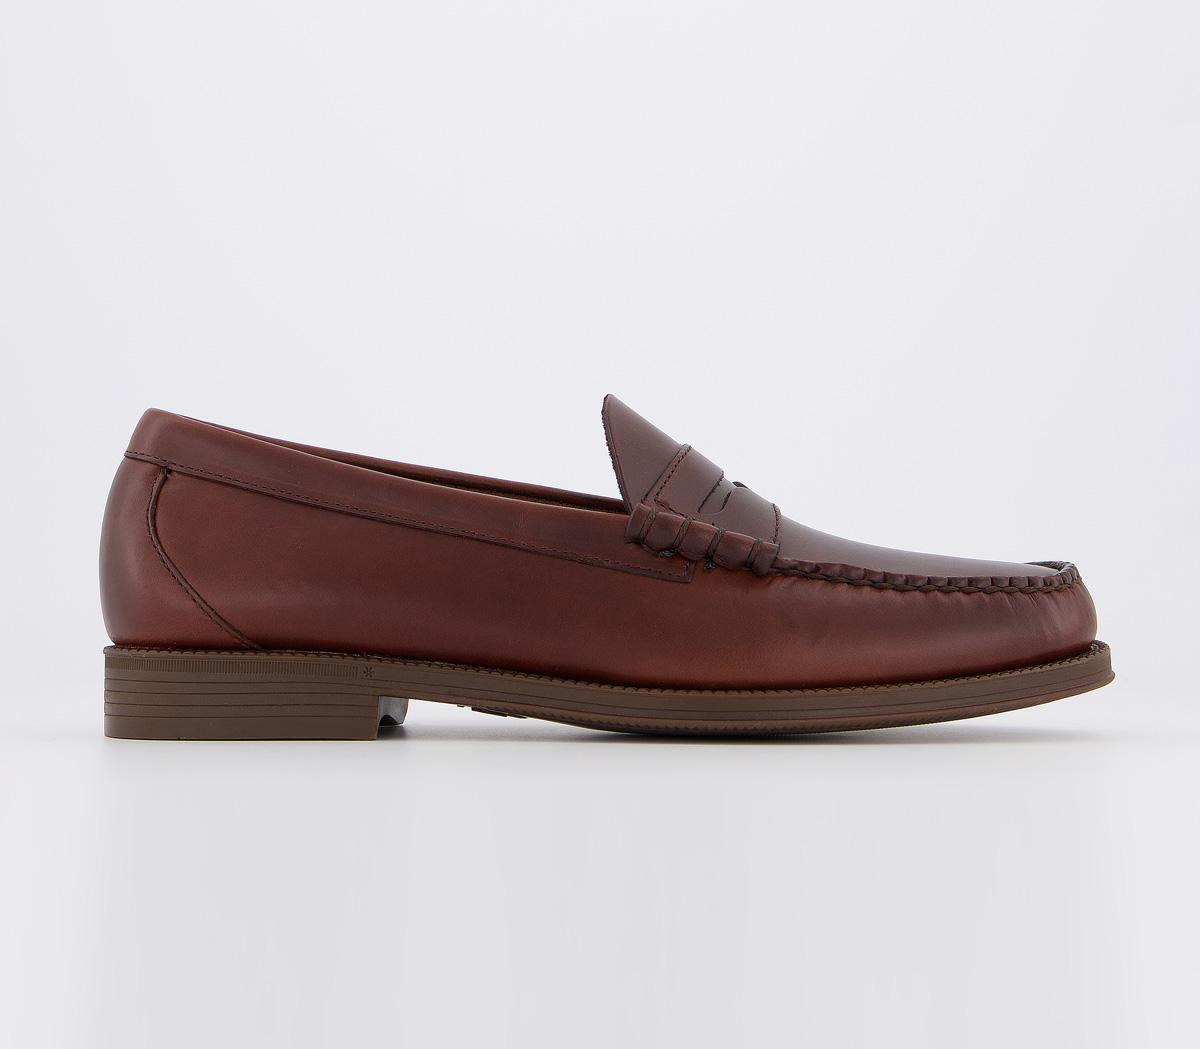 gh bass loafers